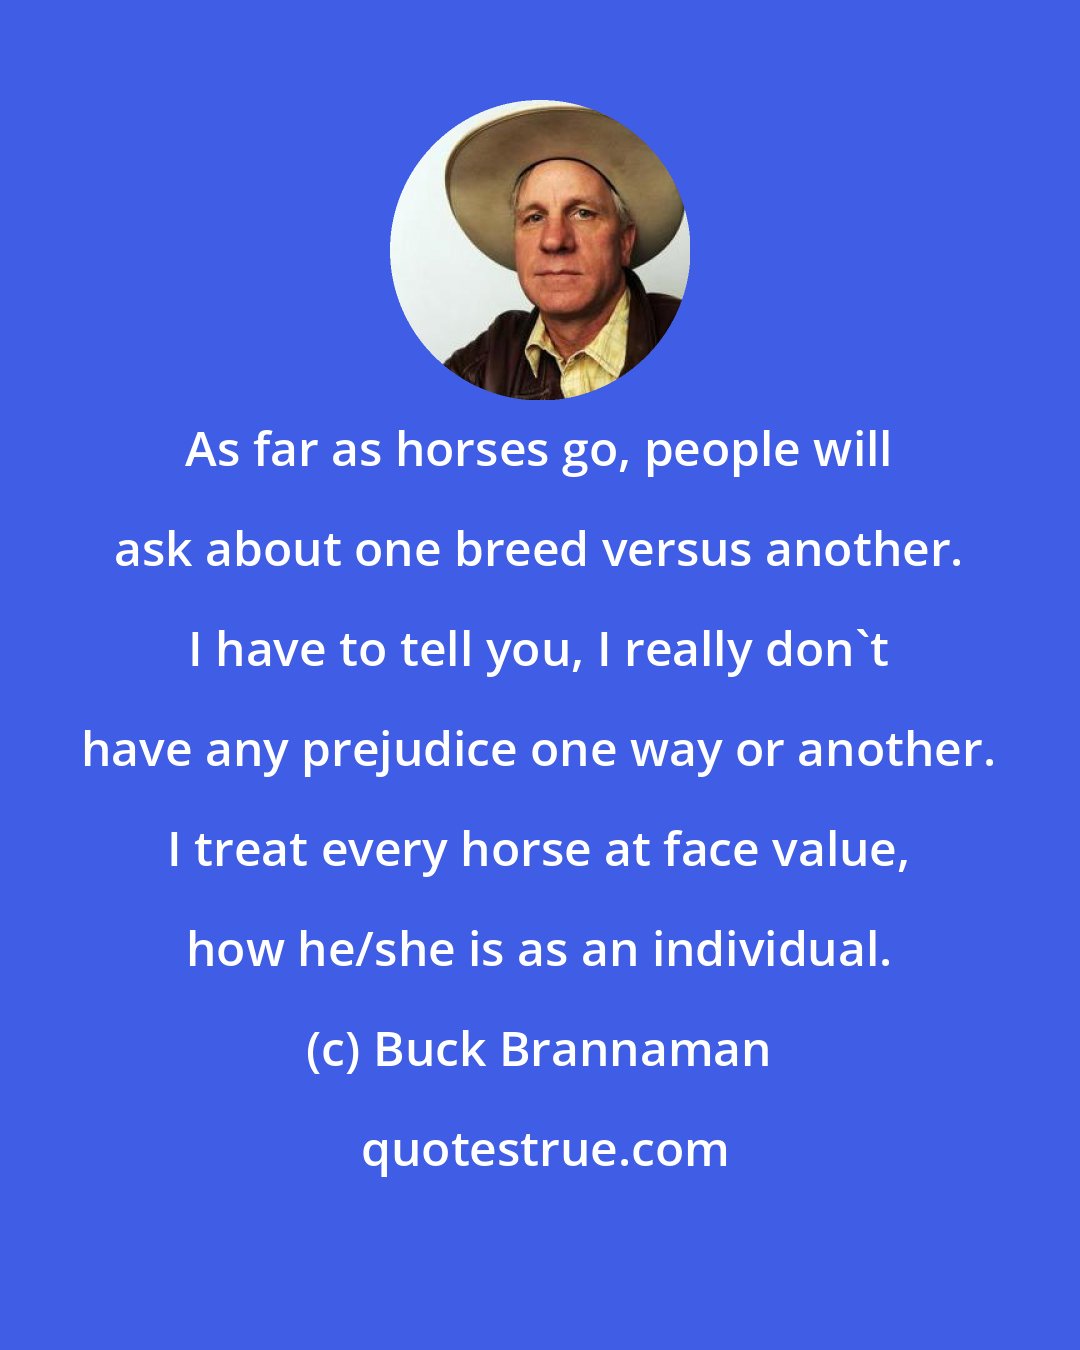 Buck Brannaman: As far as horses go, people will ask about one breed versus another. I have to tell you, I really don't have any prejudice one way or another. I treat every horse at face value, how he/she is as an individual.